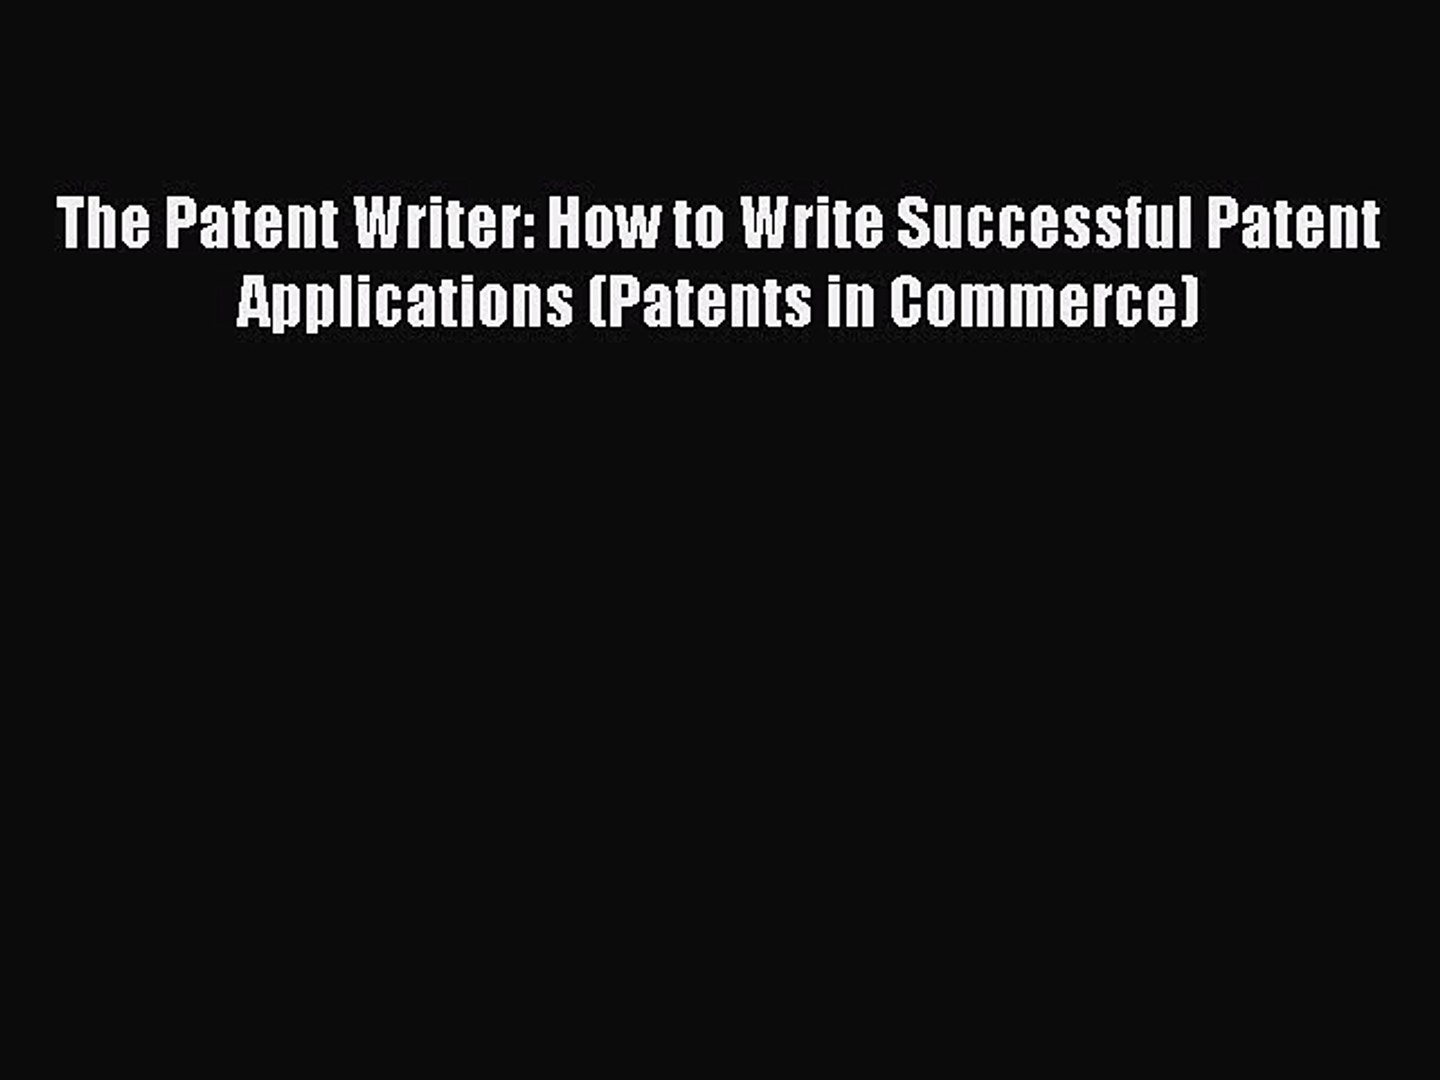 Download The Patent Writer: How to Write Successful Patent